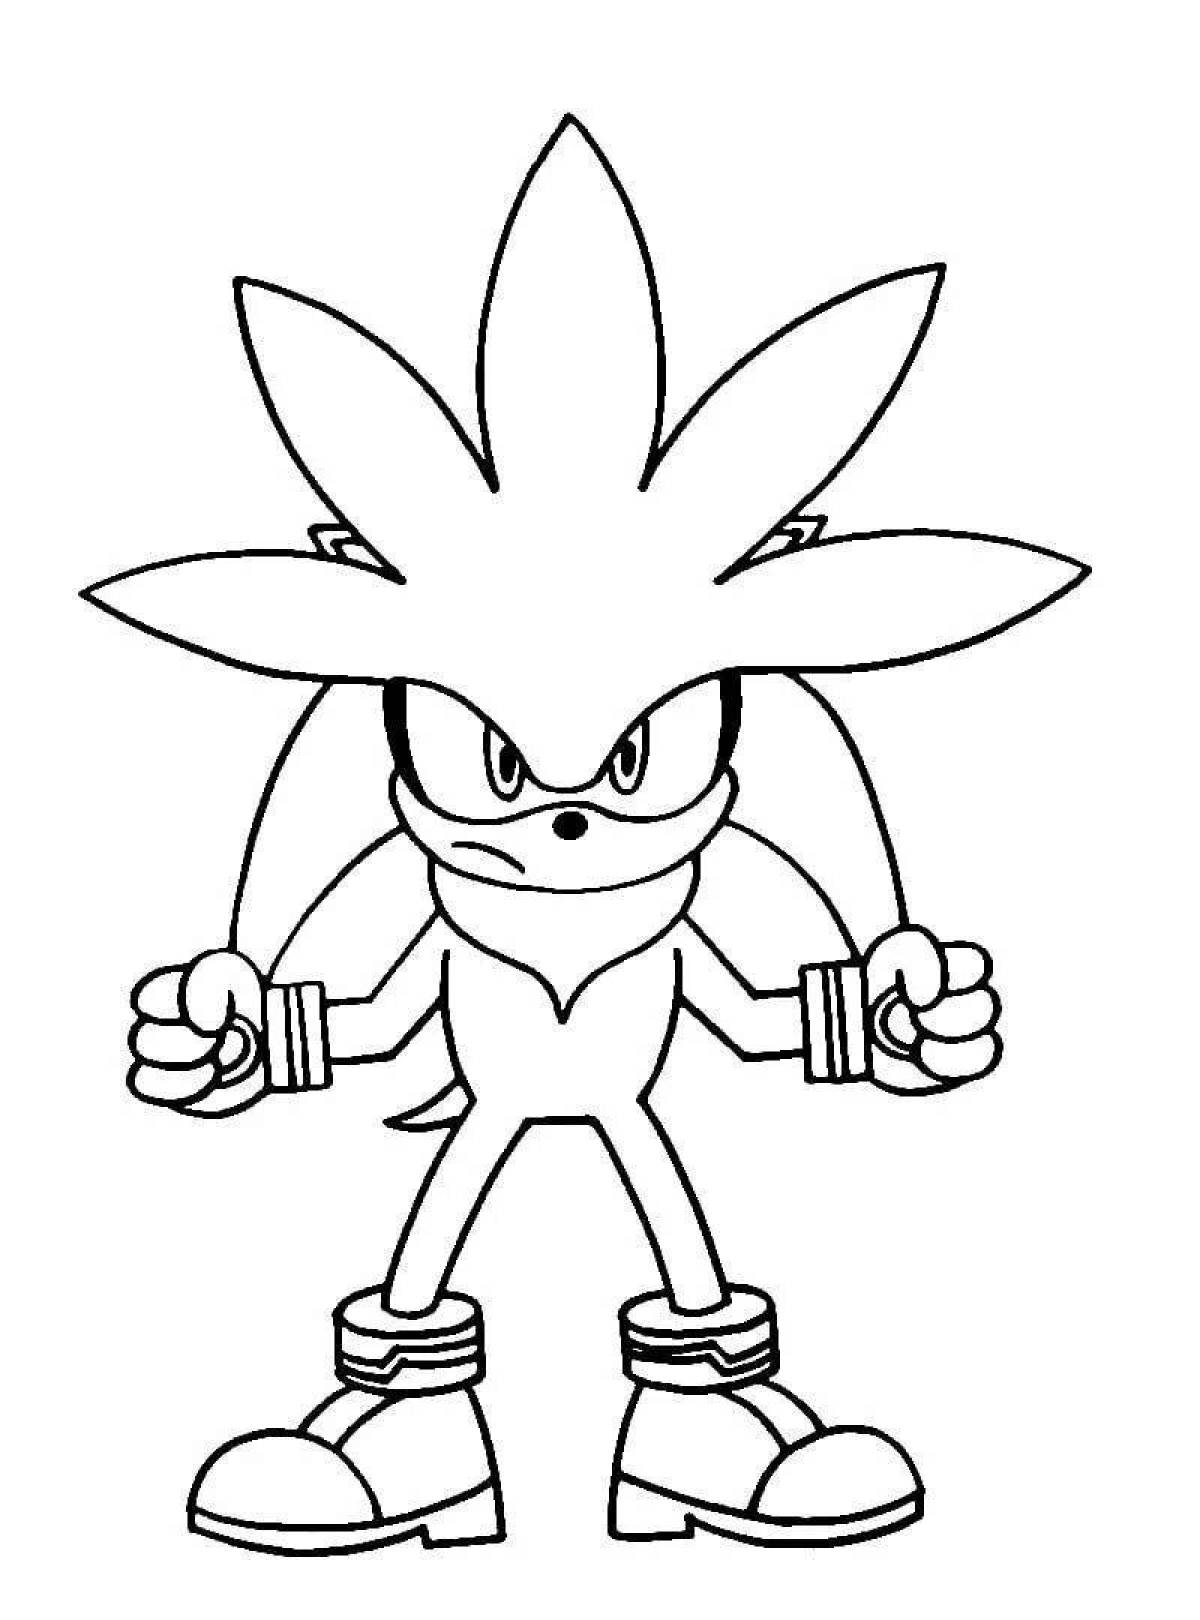 Amazing super hedgehog sonic coloring page